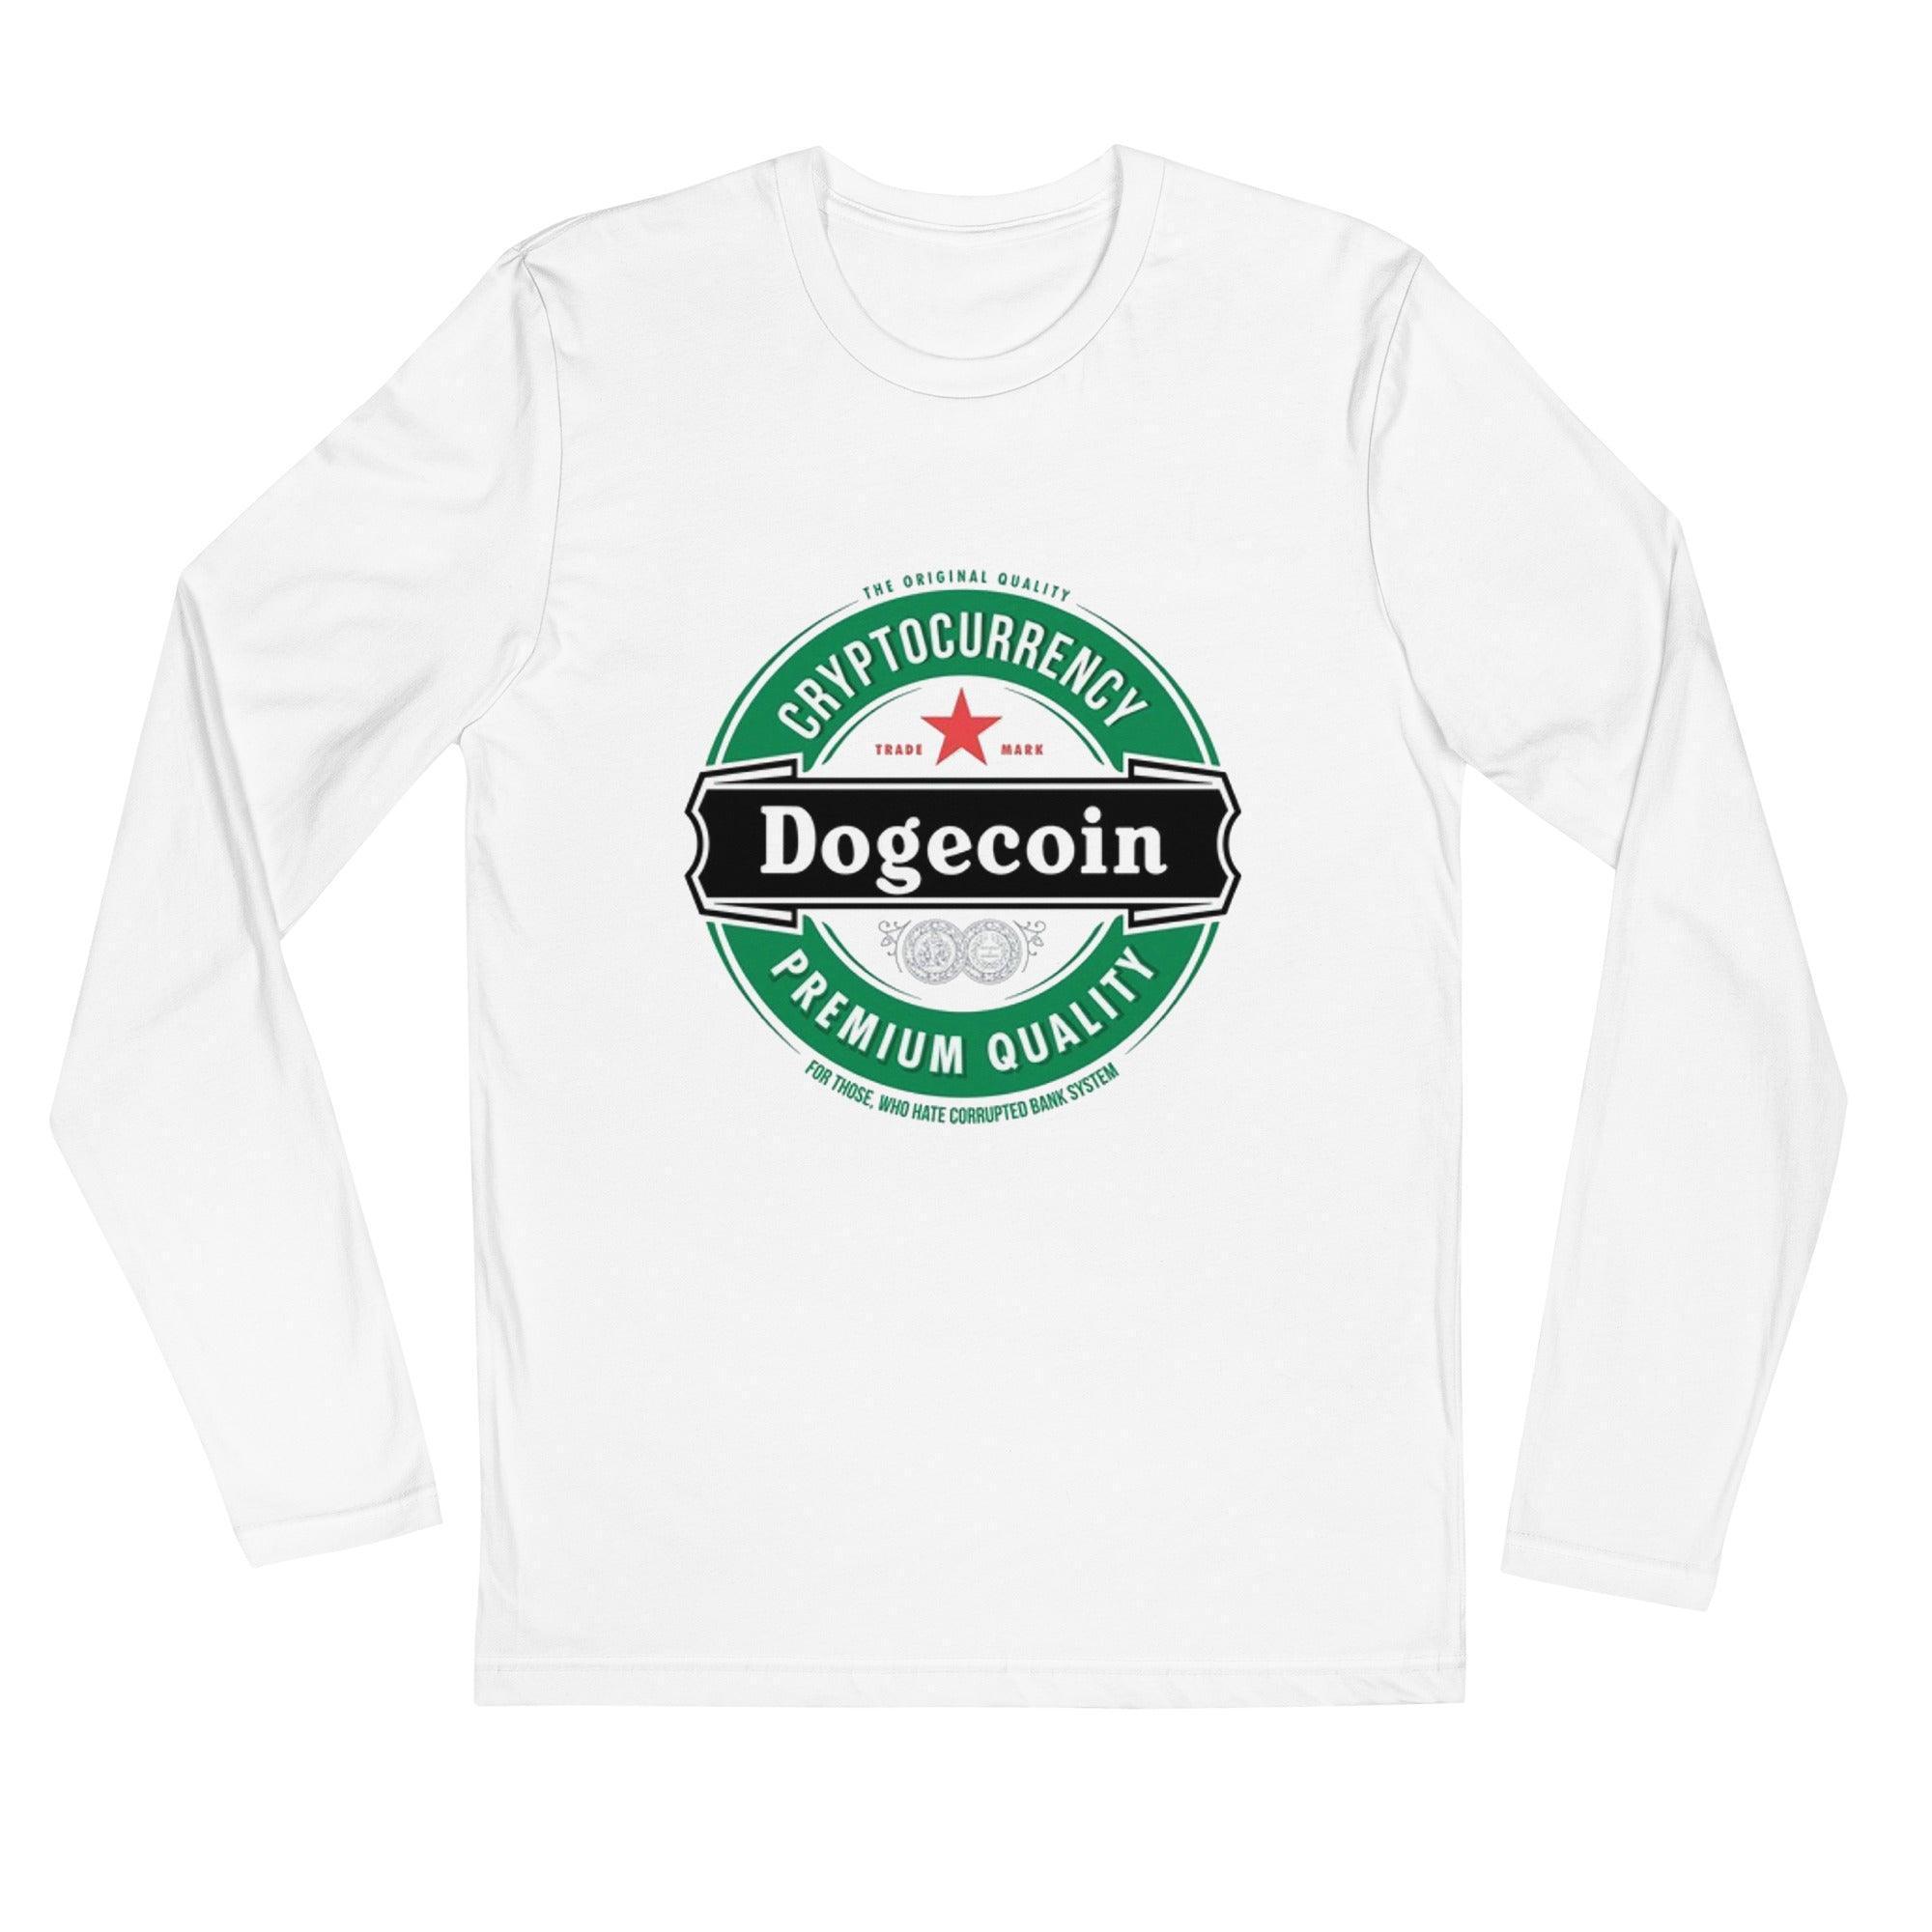 Dogecoin Quality Long Sleeve T-Shirt - InvestmenTees